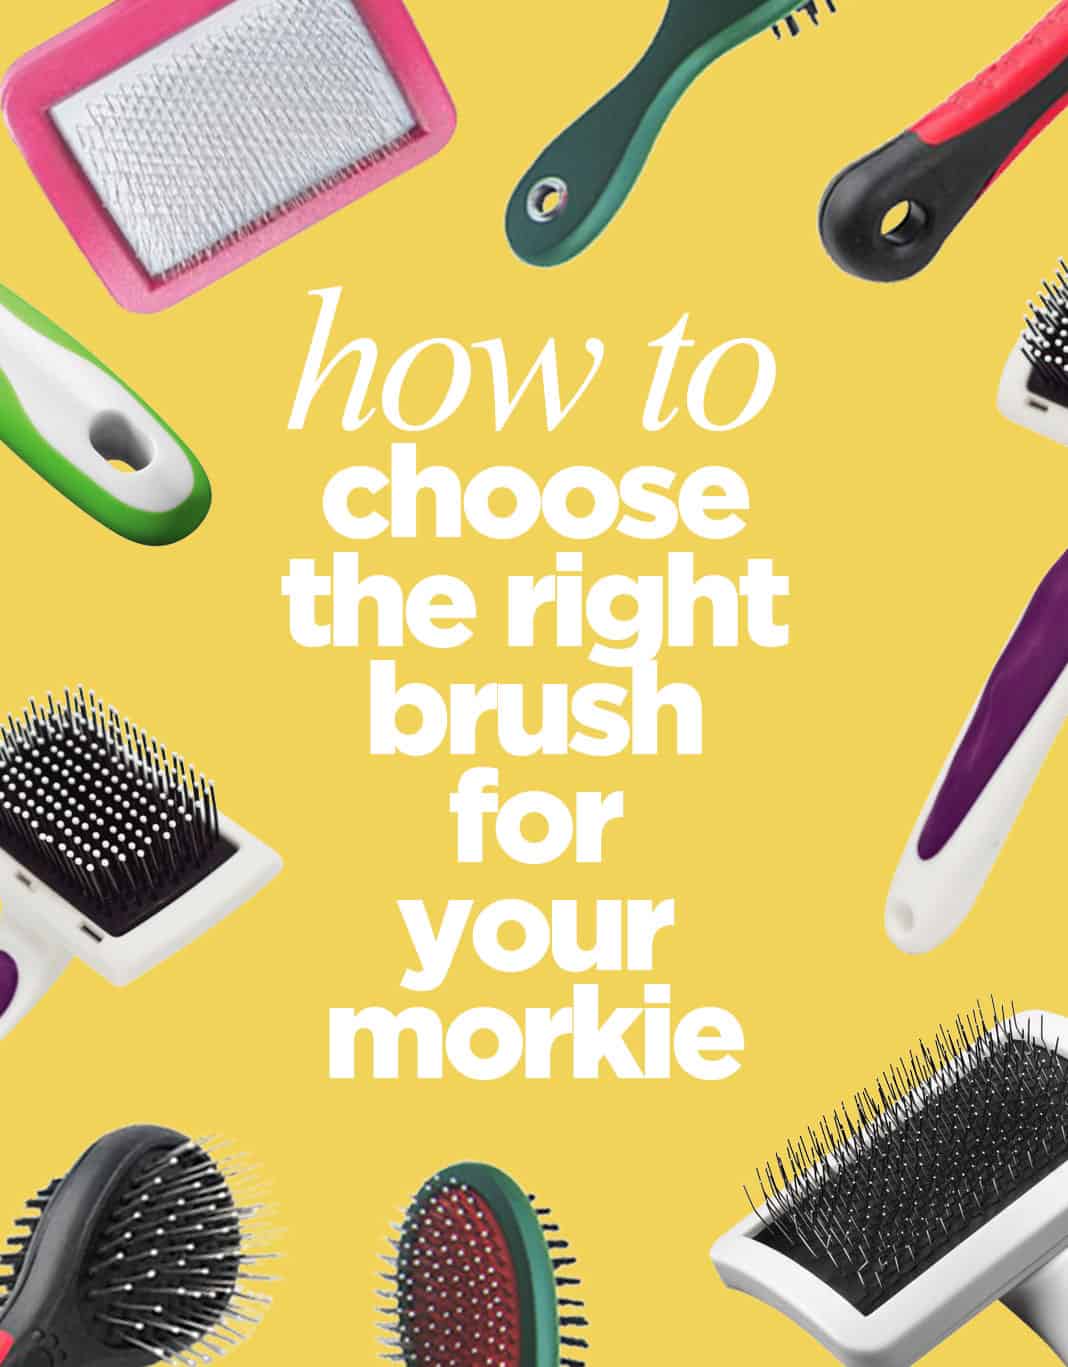 Right Brush For Your Morkie